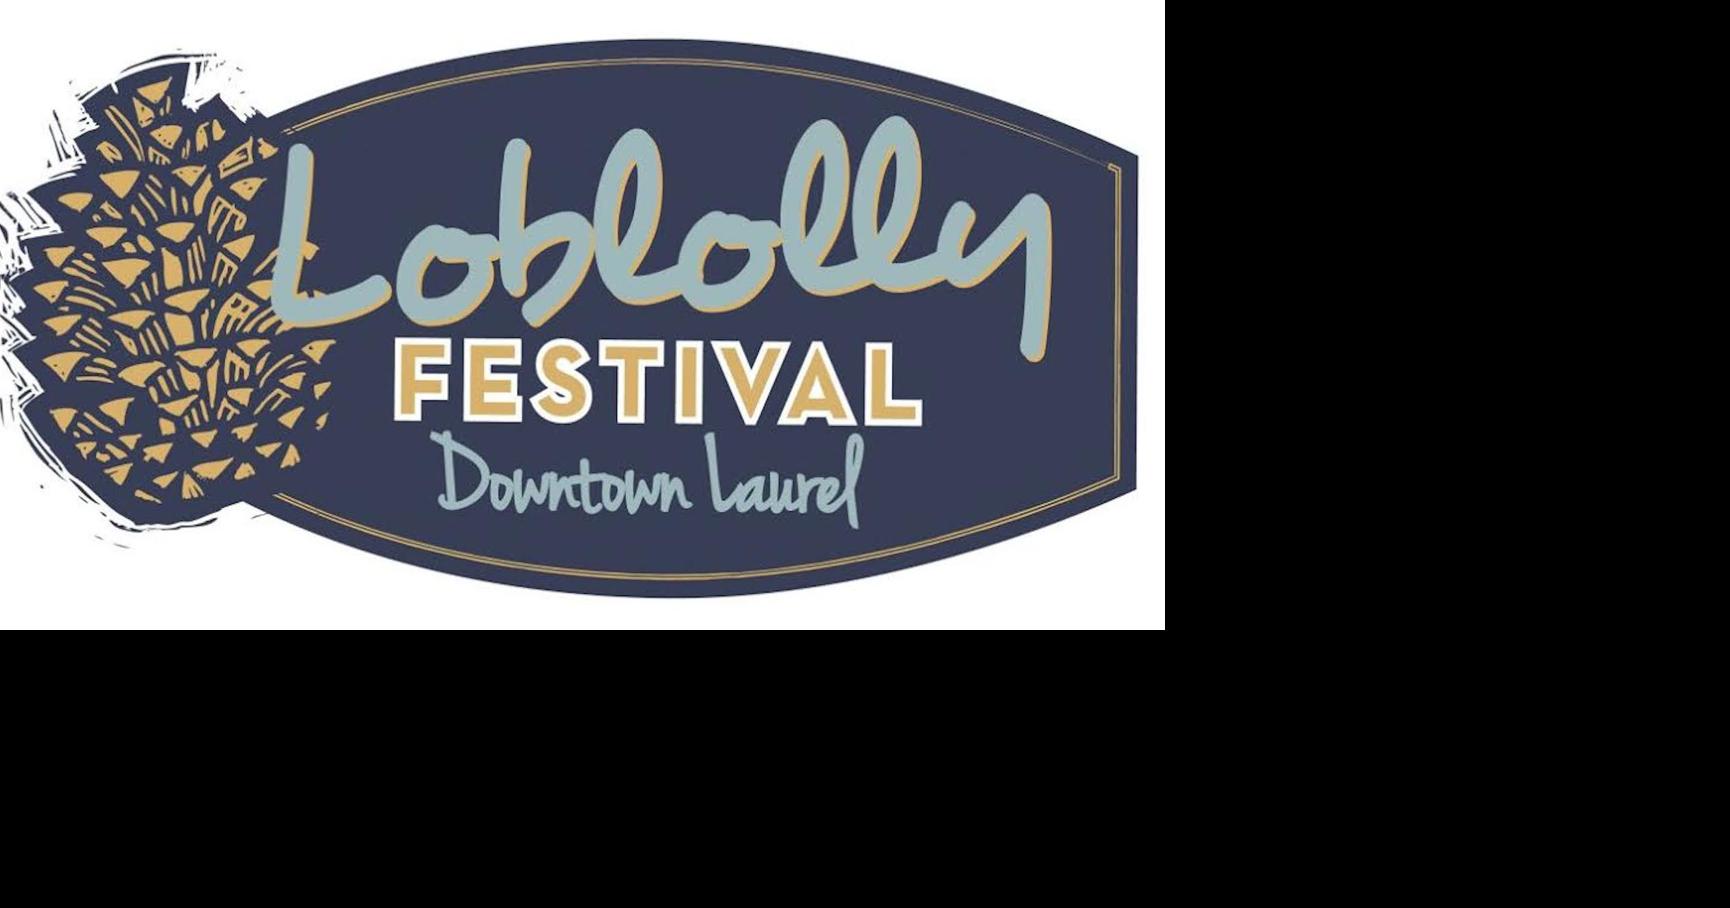 10th annual Loblolly Festival Oct. 5 in Downtown Laurel Local News